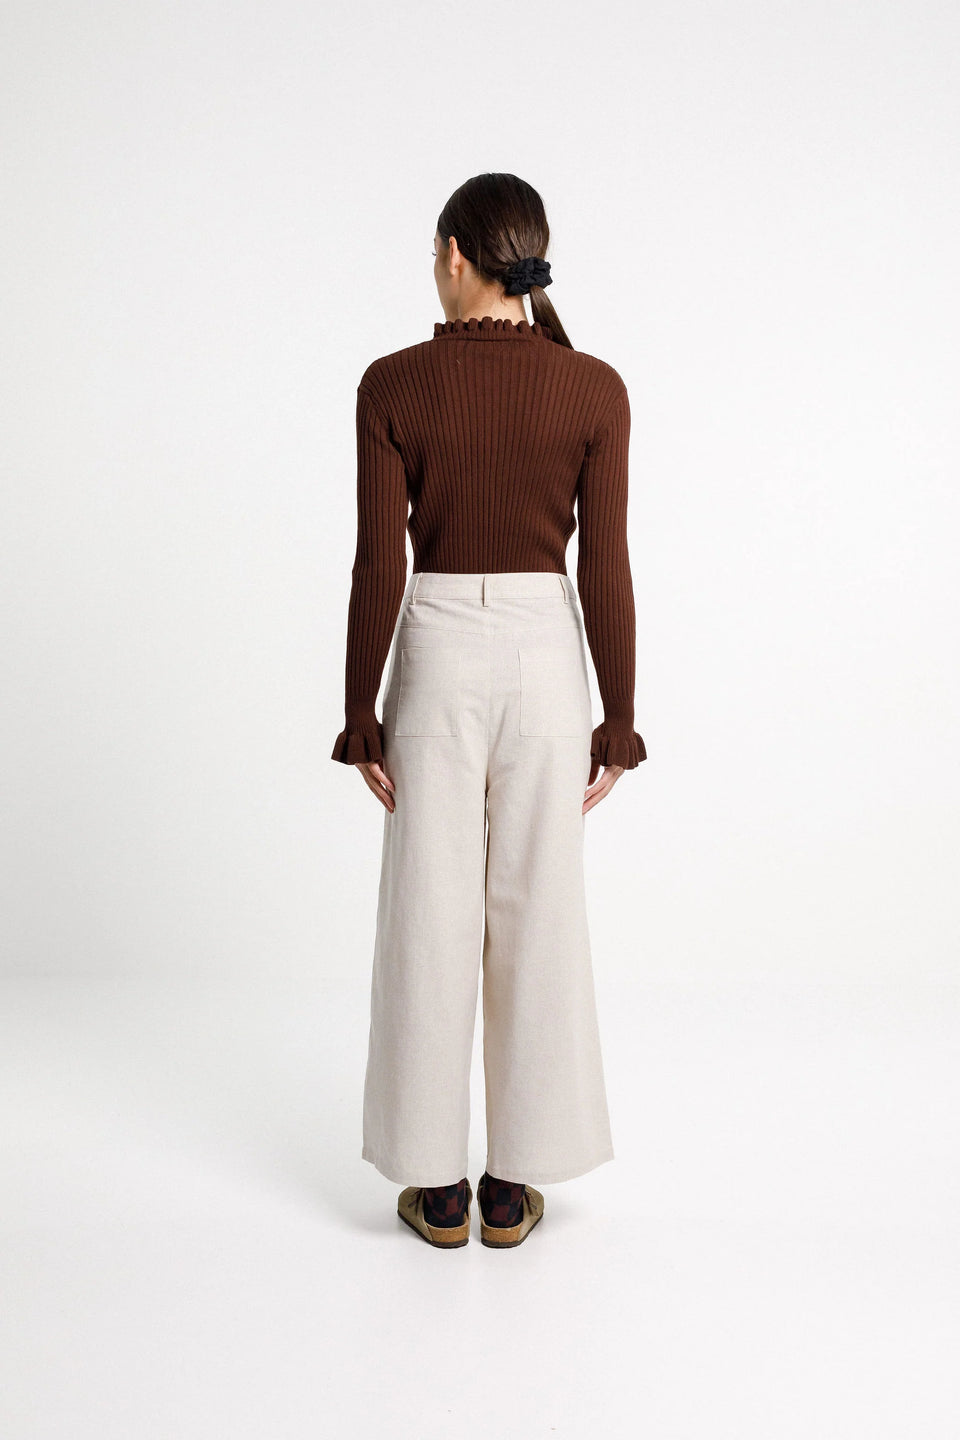 Thing Thing Peggy Pant - Cream Latte Check